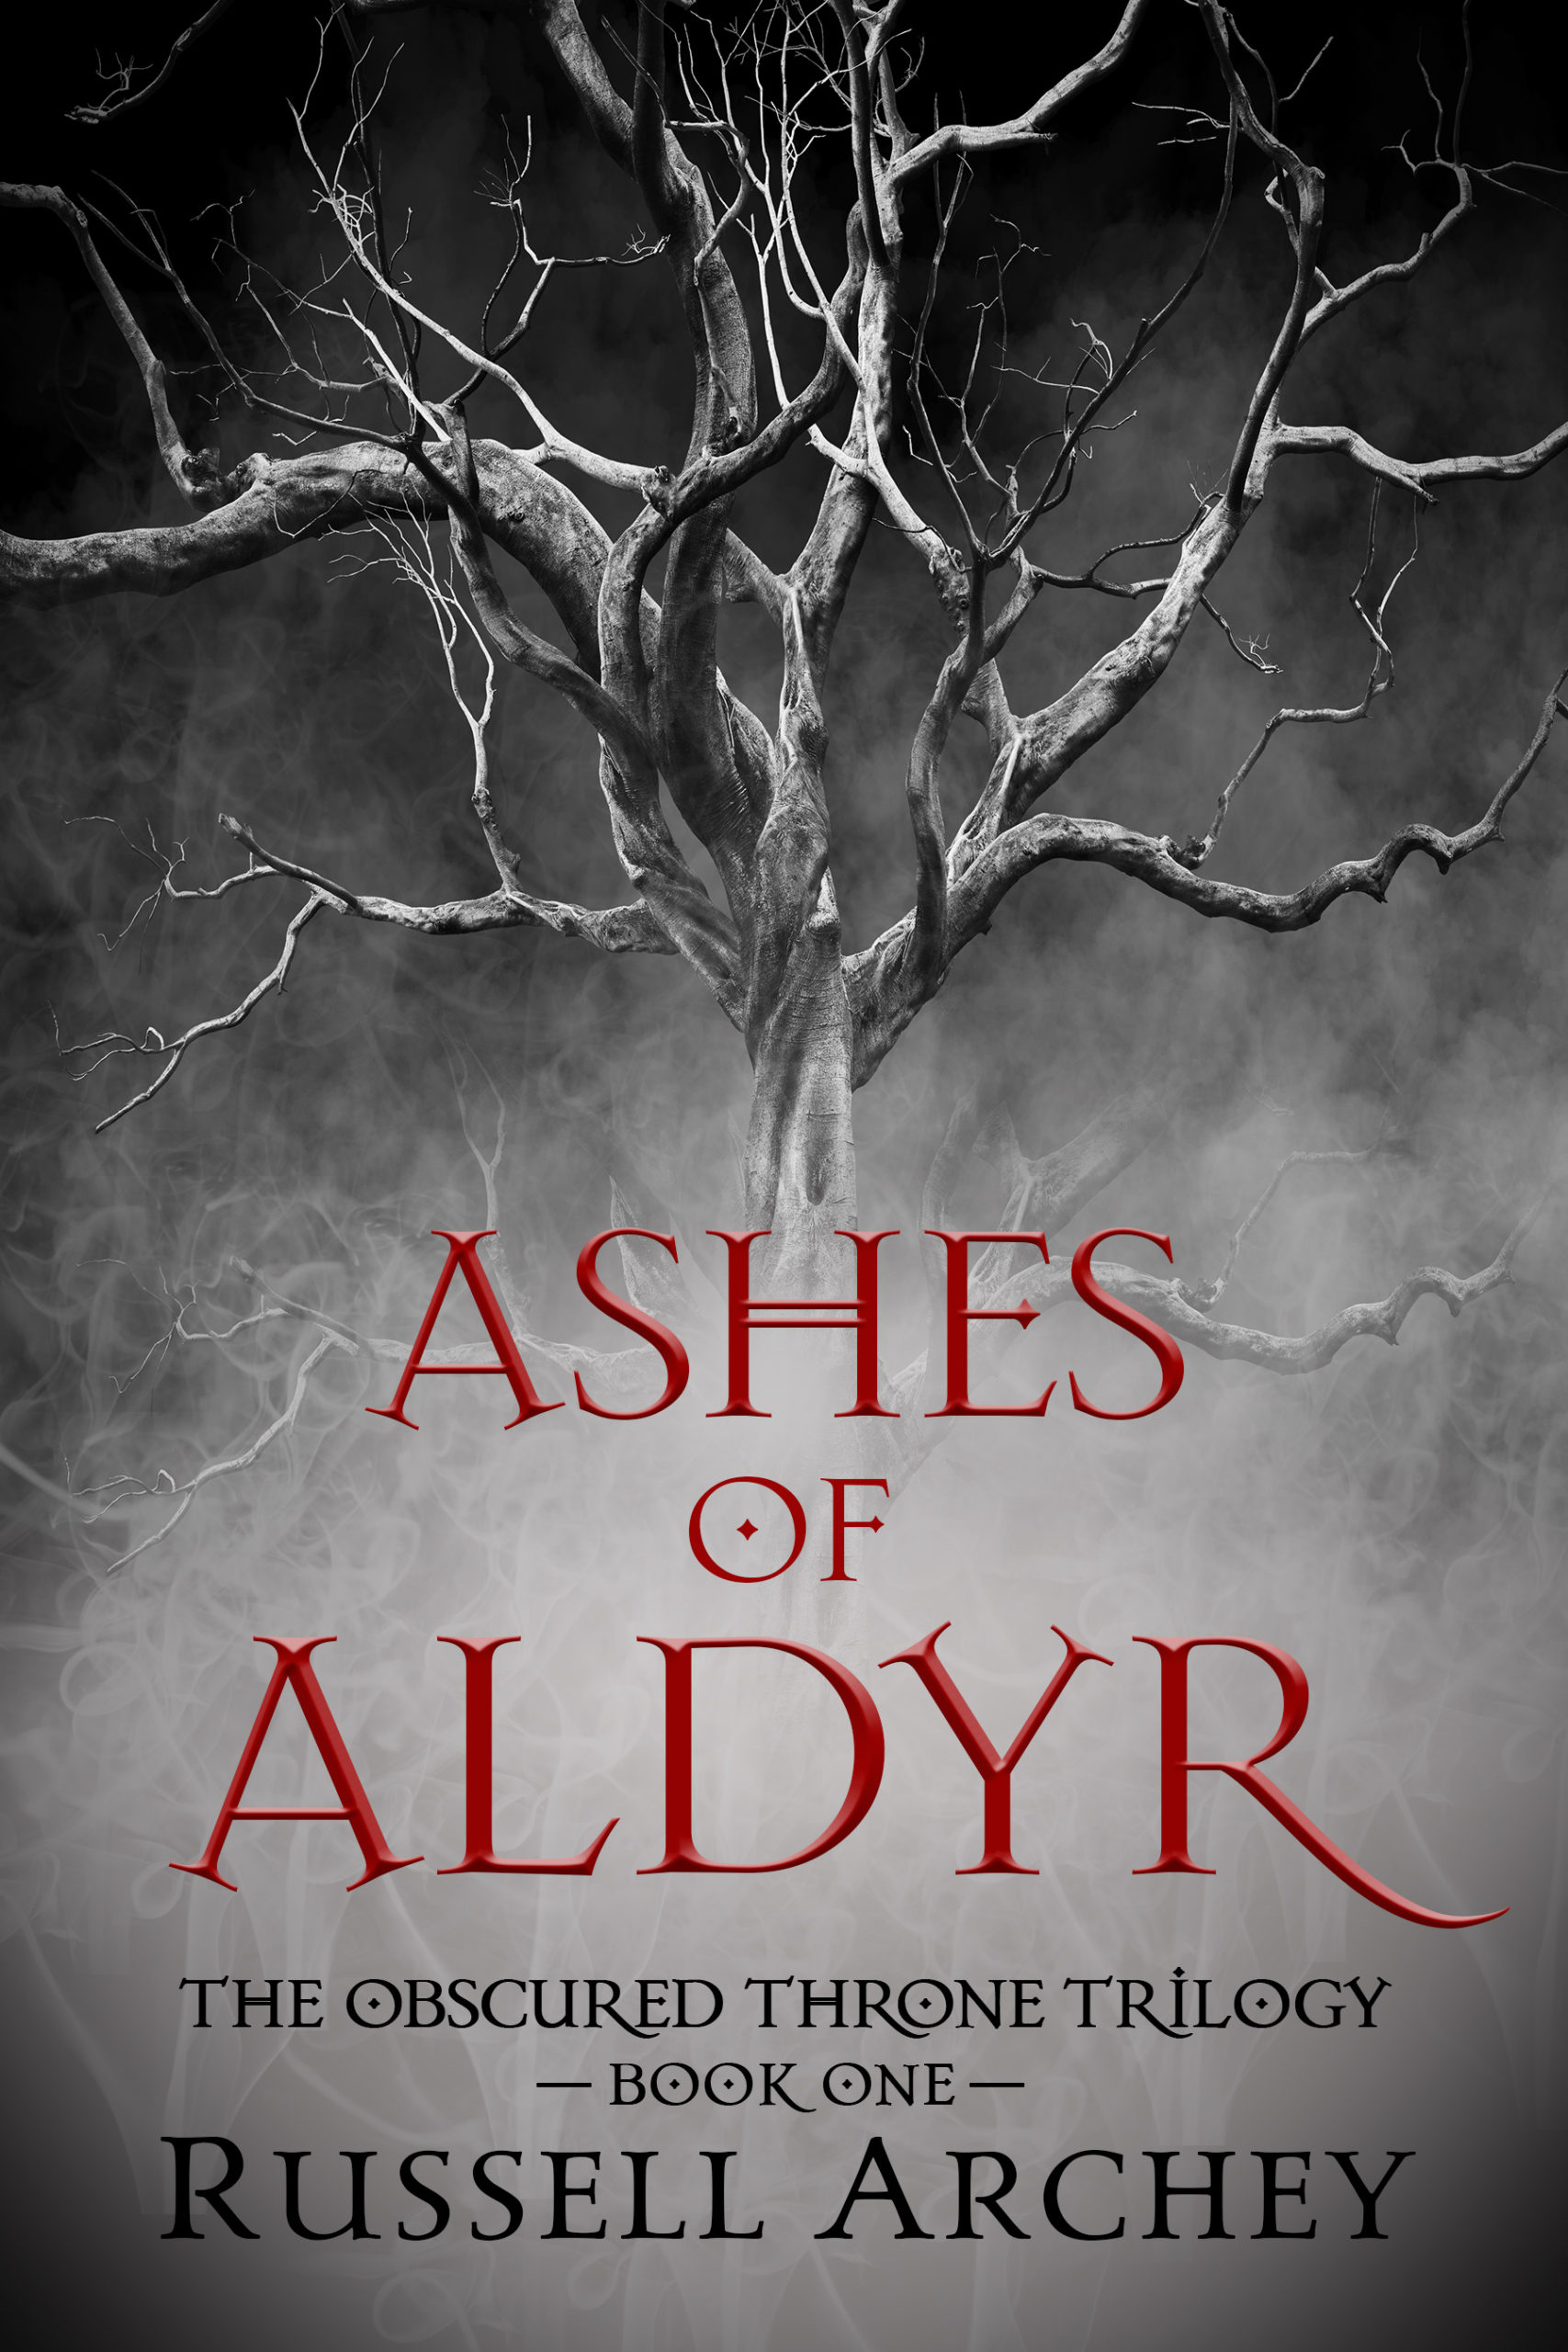 Ashes of Aldyr by Russell Archey